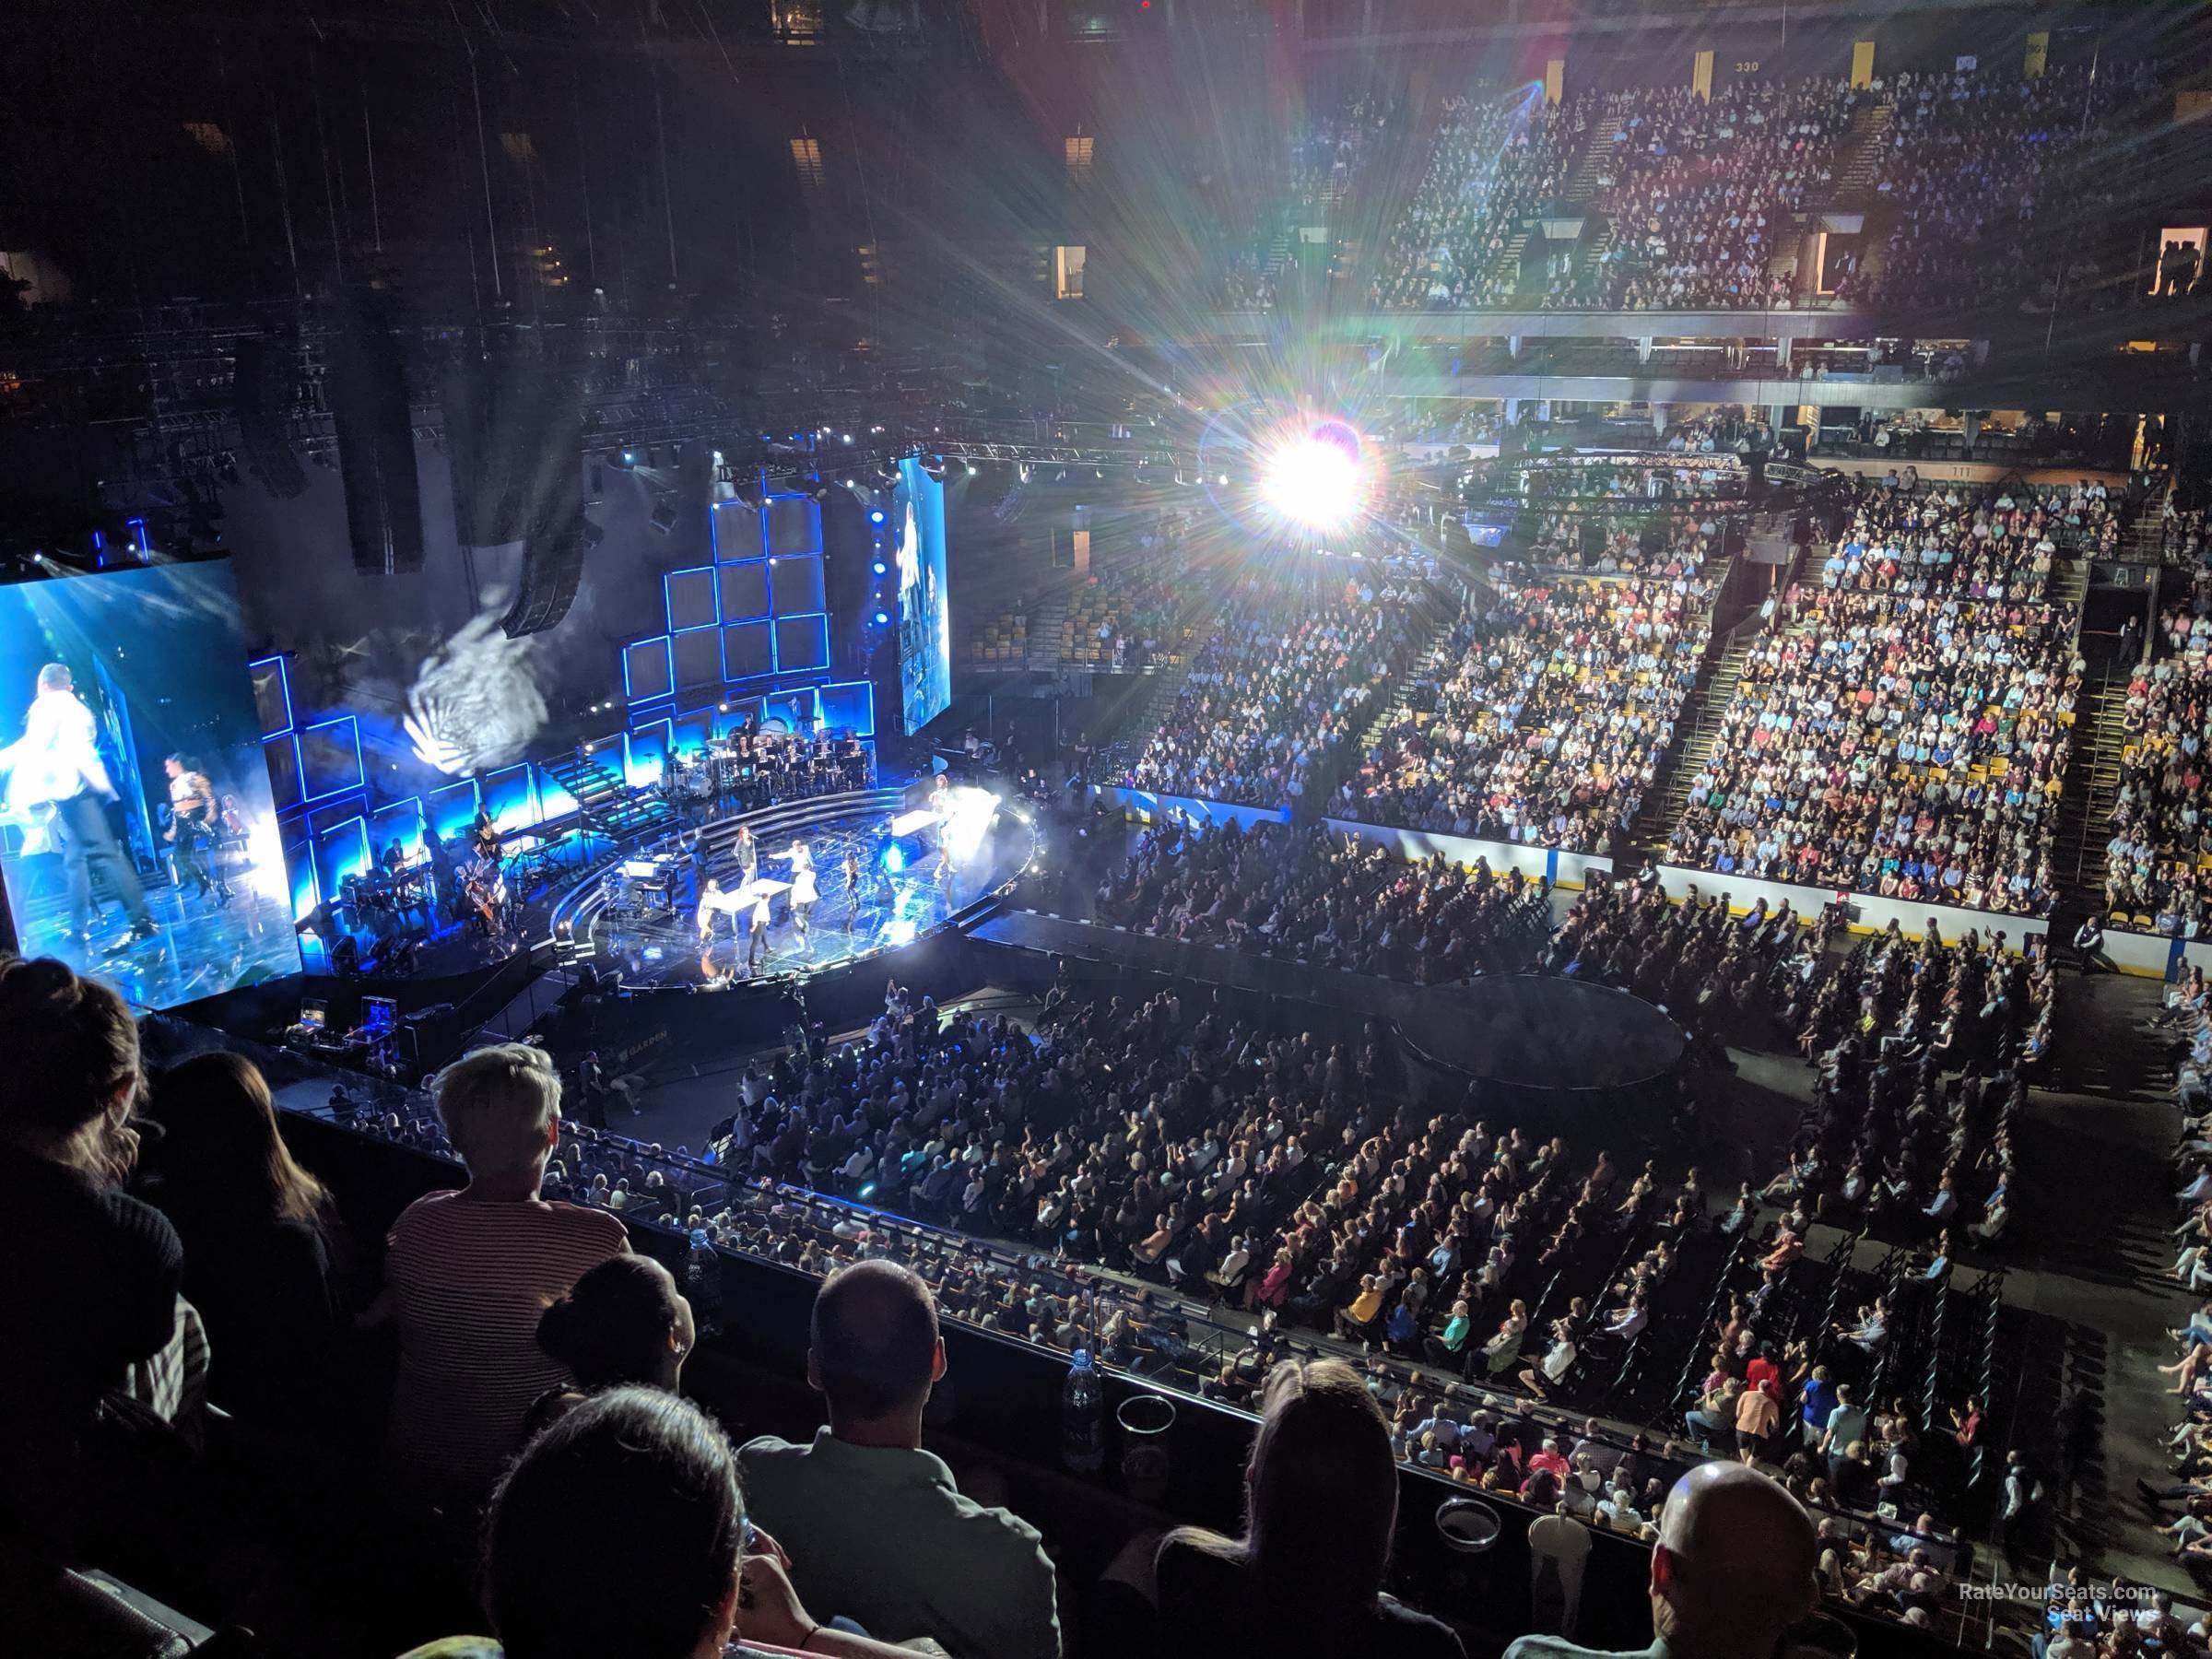 section 315, row 3 seat view  for concert - td garden